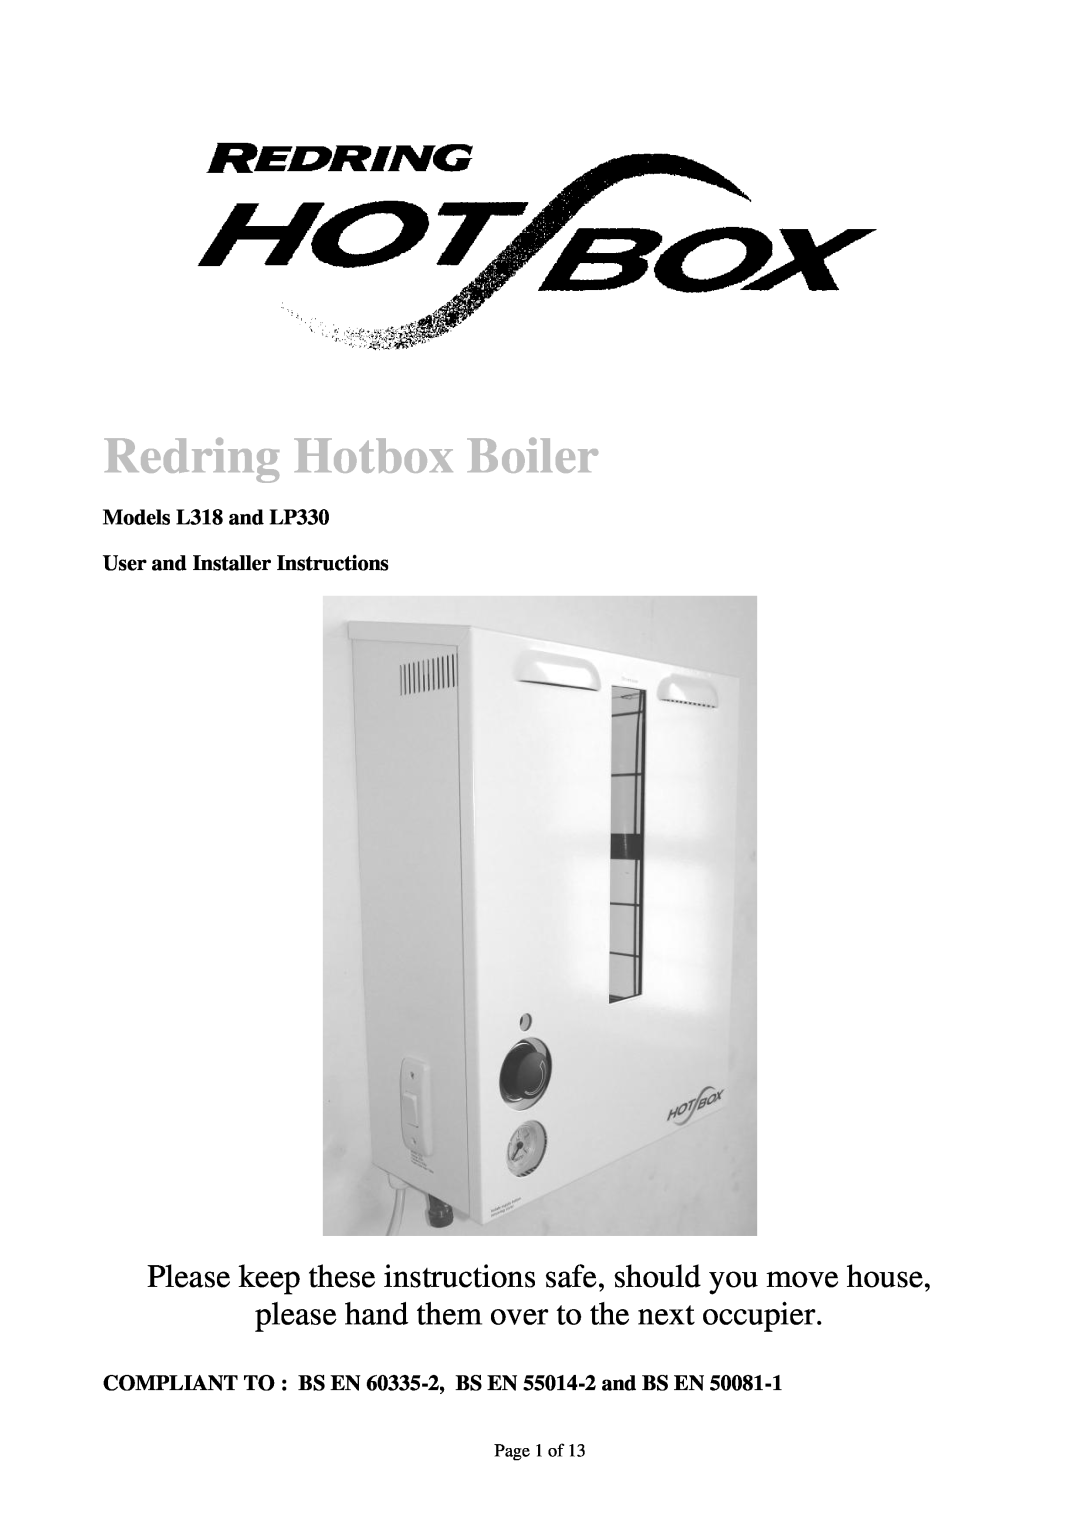 Redring manual Models L318 and LP330, User and Installer Instructions, Redring Hotbox Boiler 